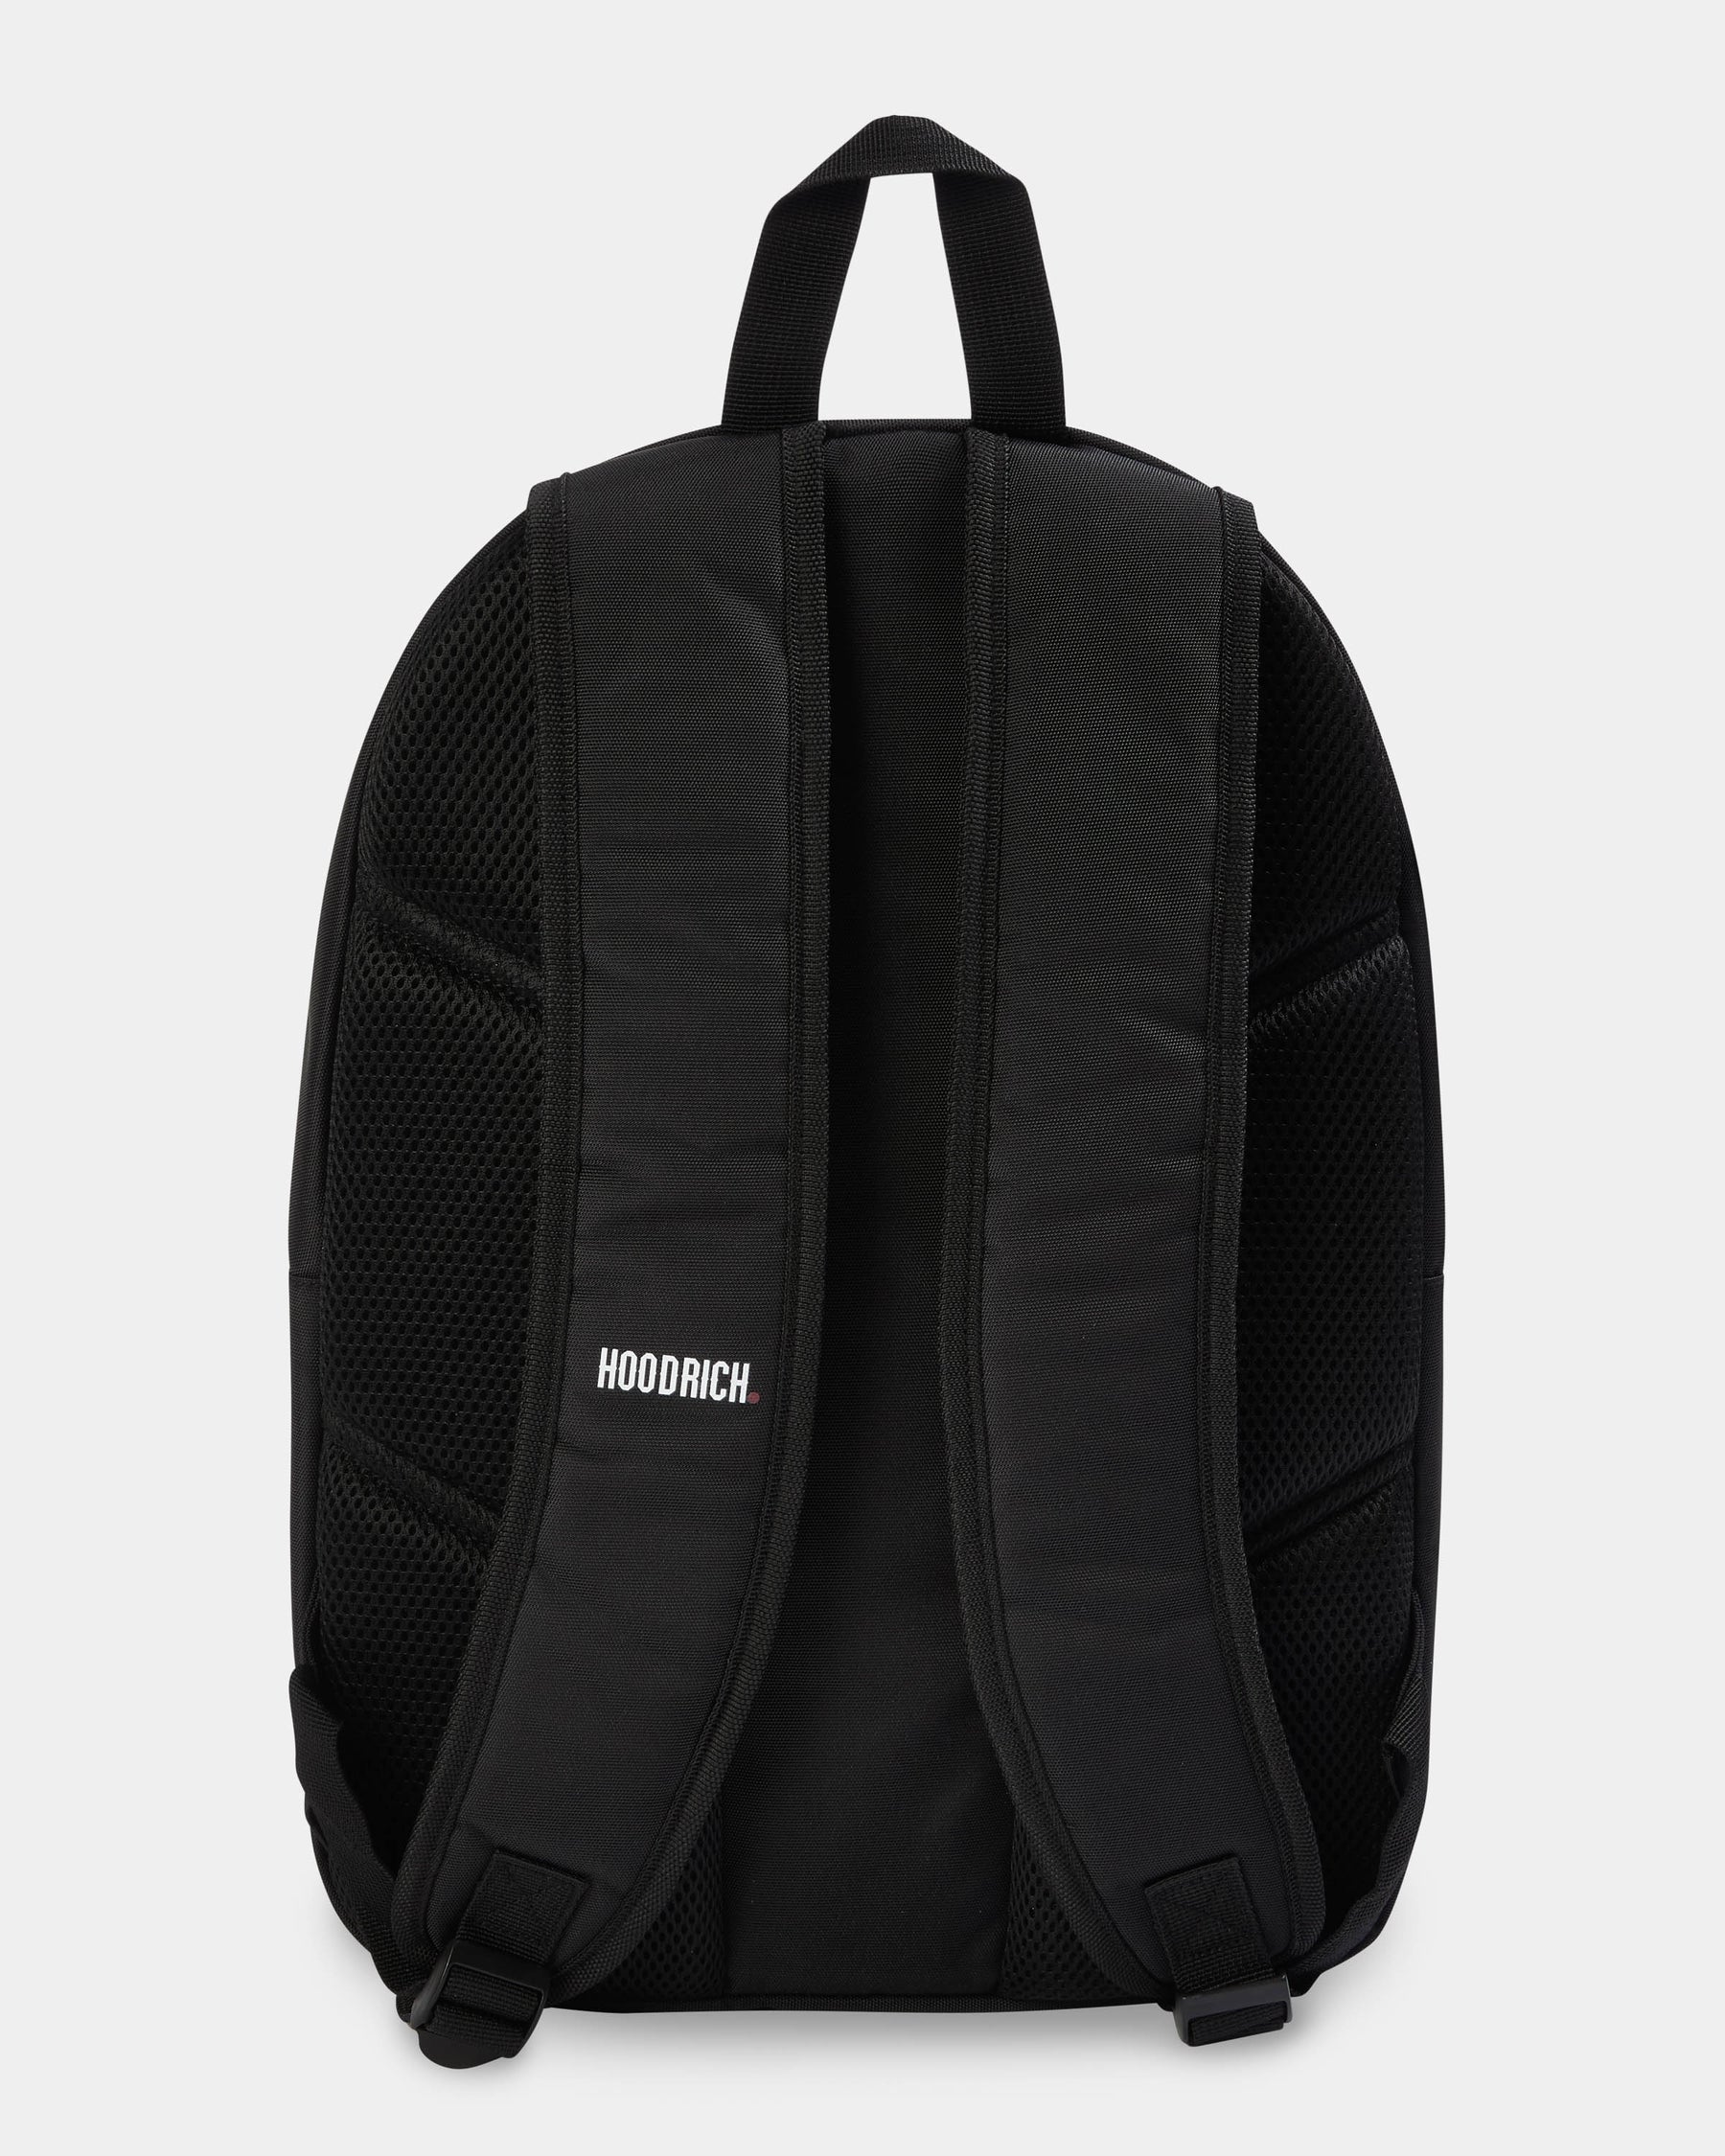 Command Backpack - Black/Red/White